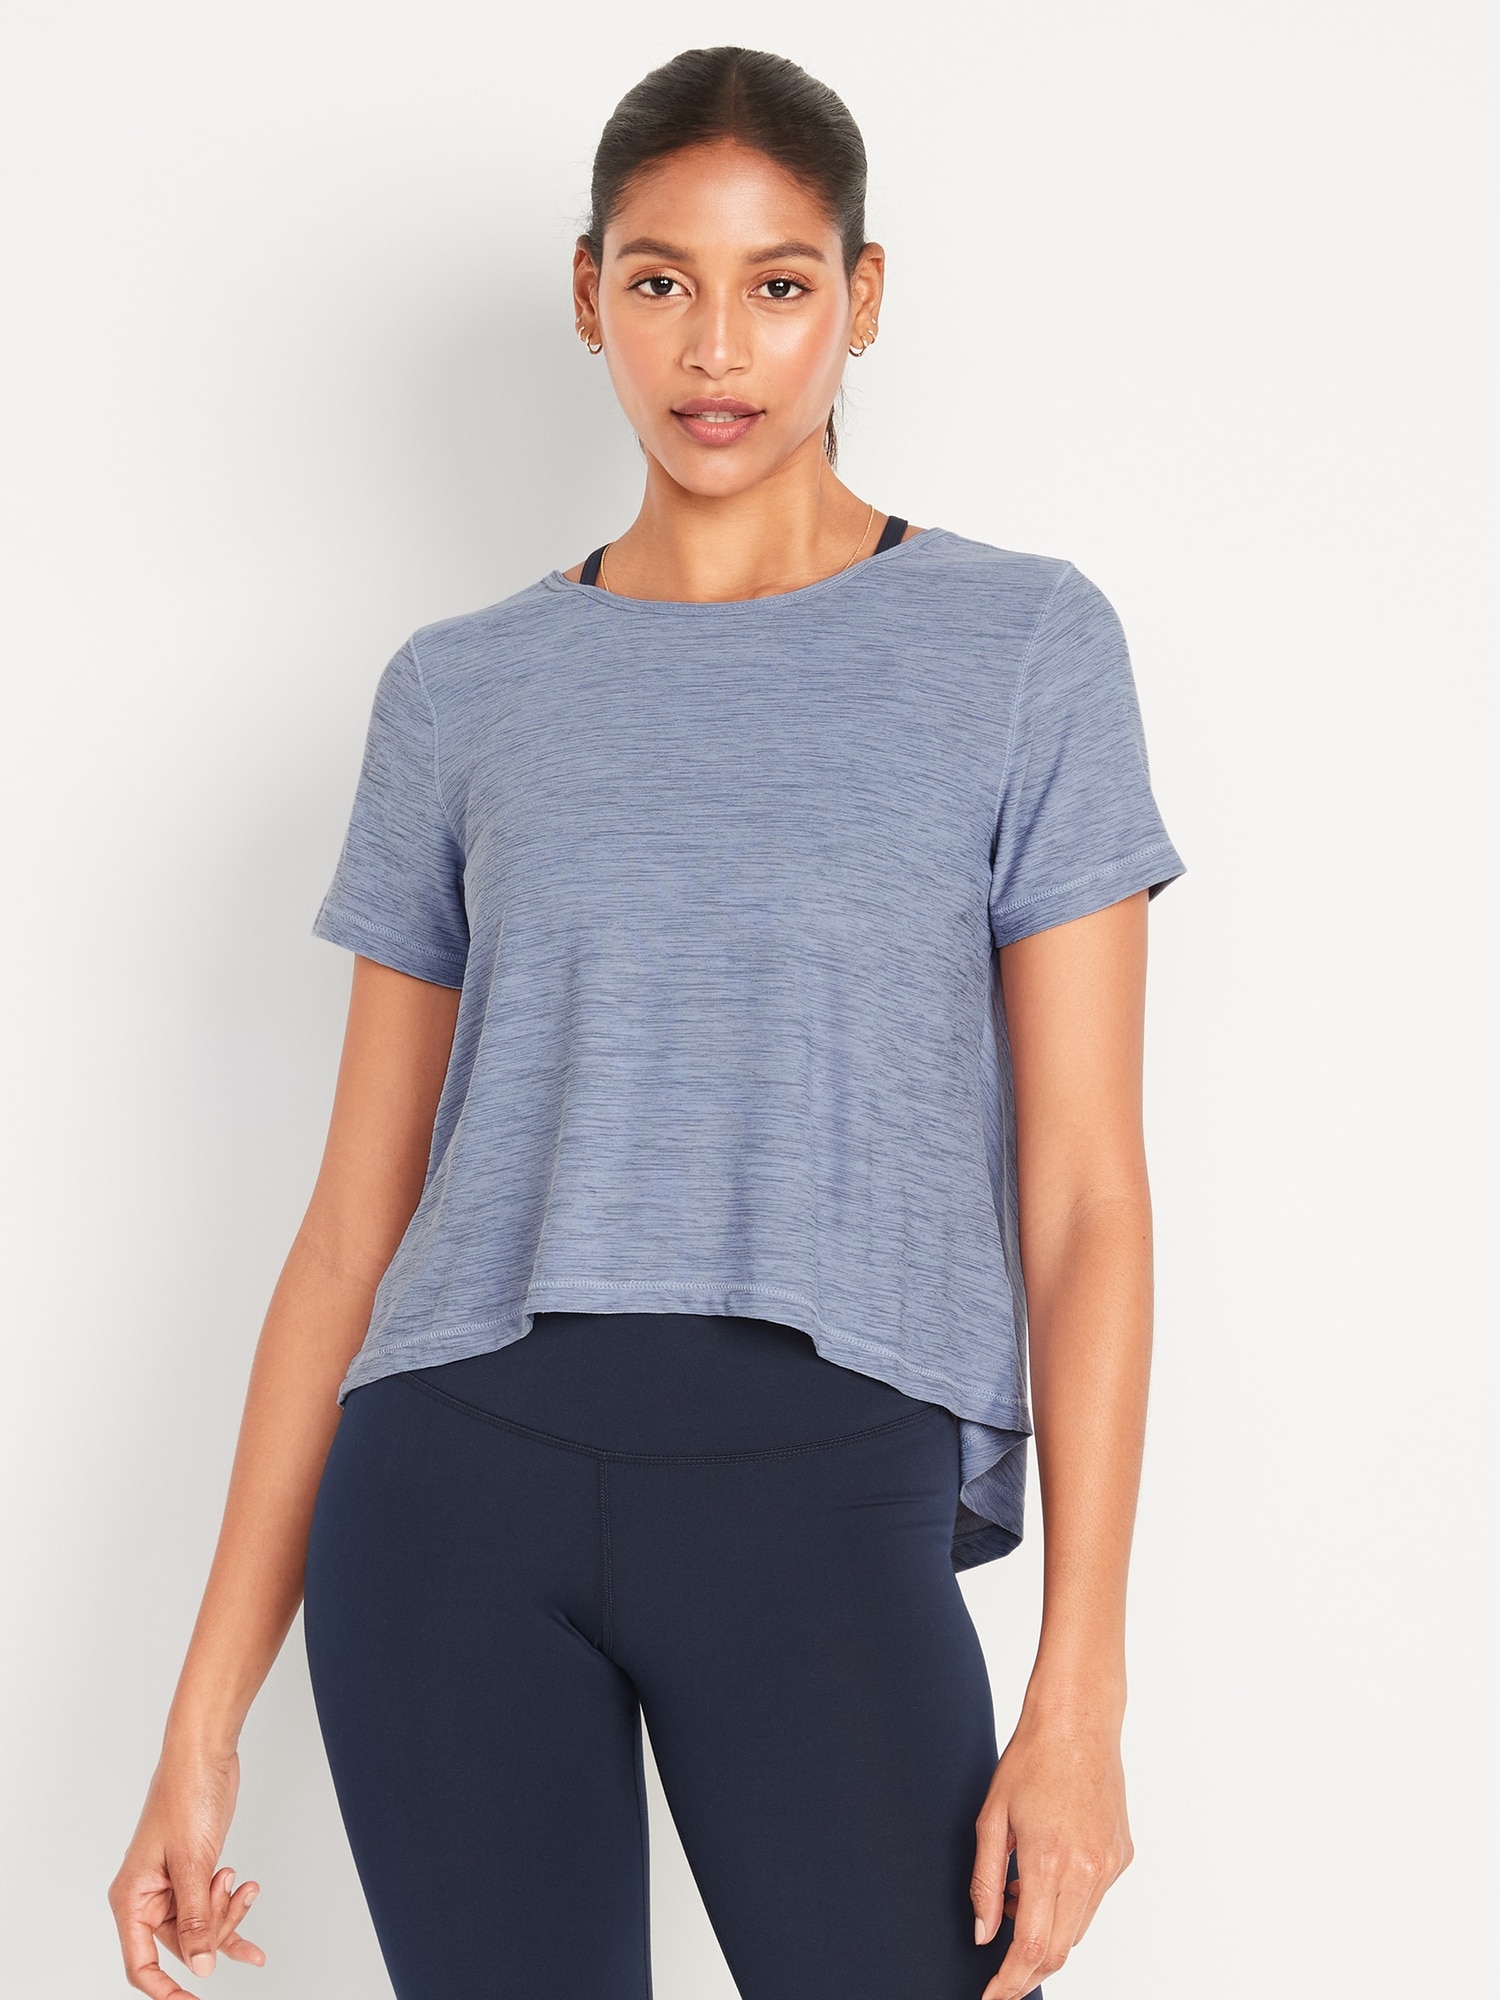 Short-Sleeve Breathe ON Reversible Cropped T-Shirt for Women | Old